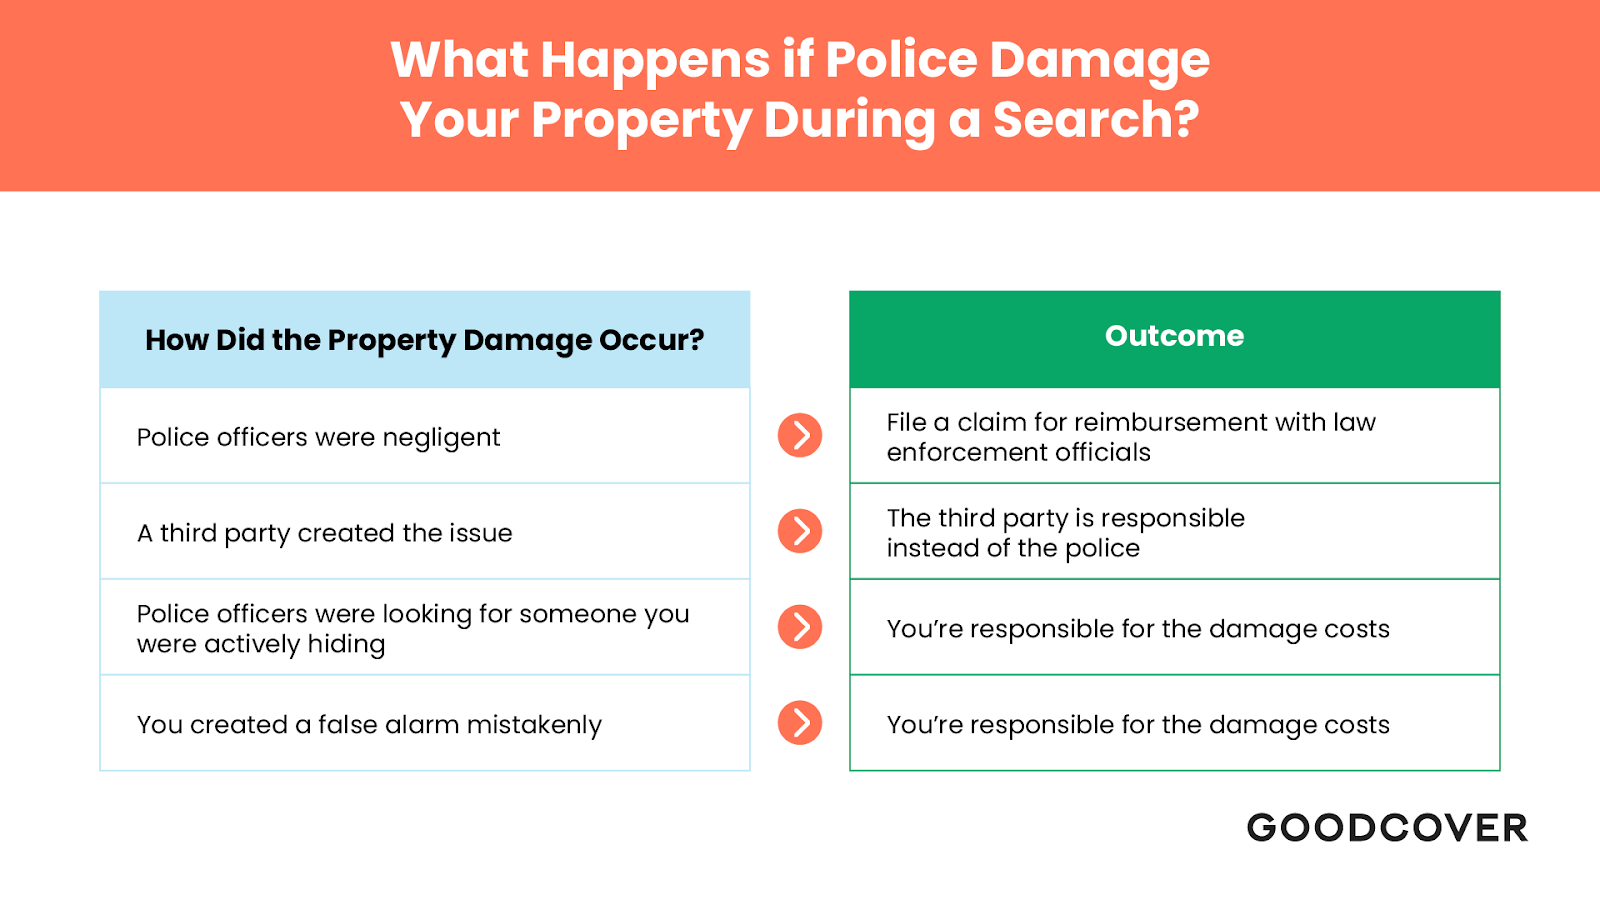 What happens if police damage your property during a search?